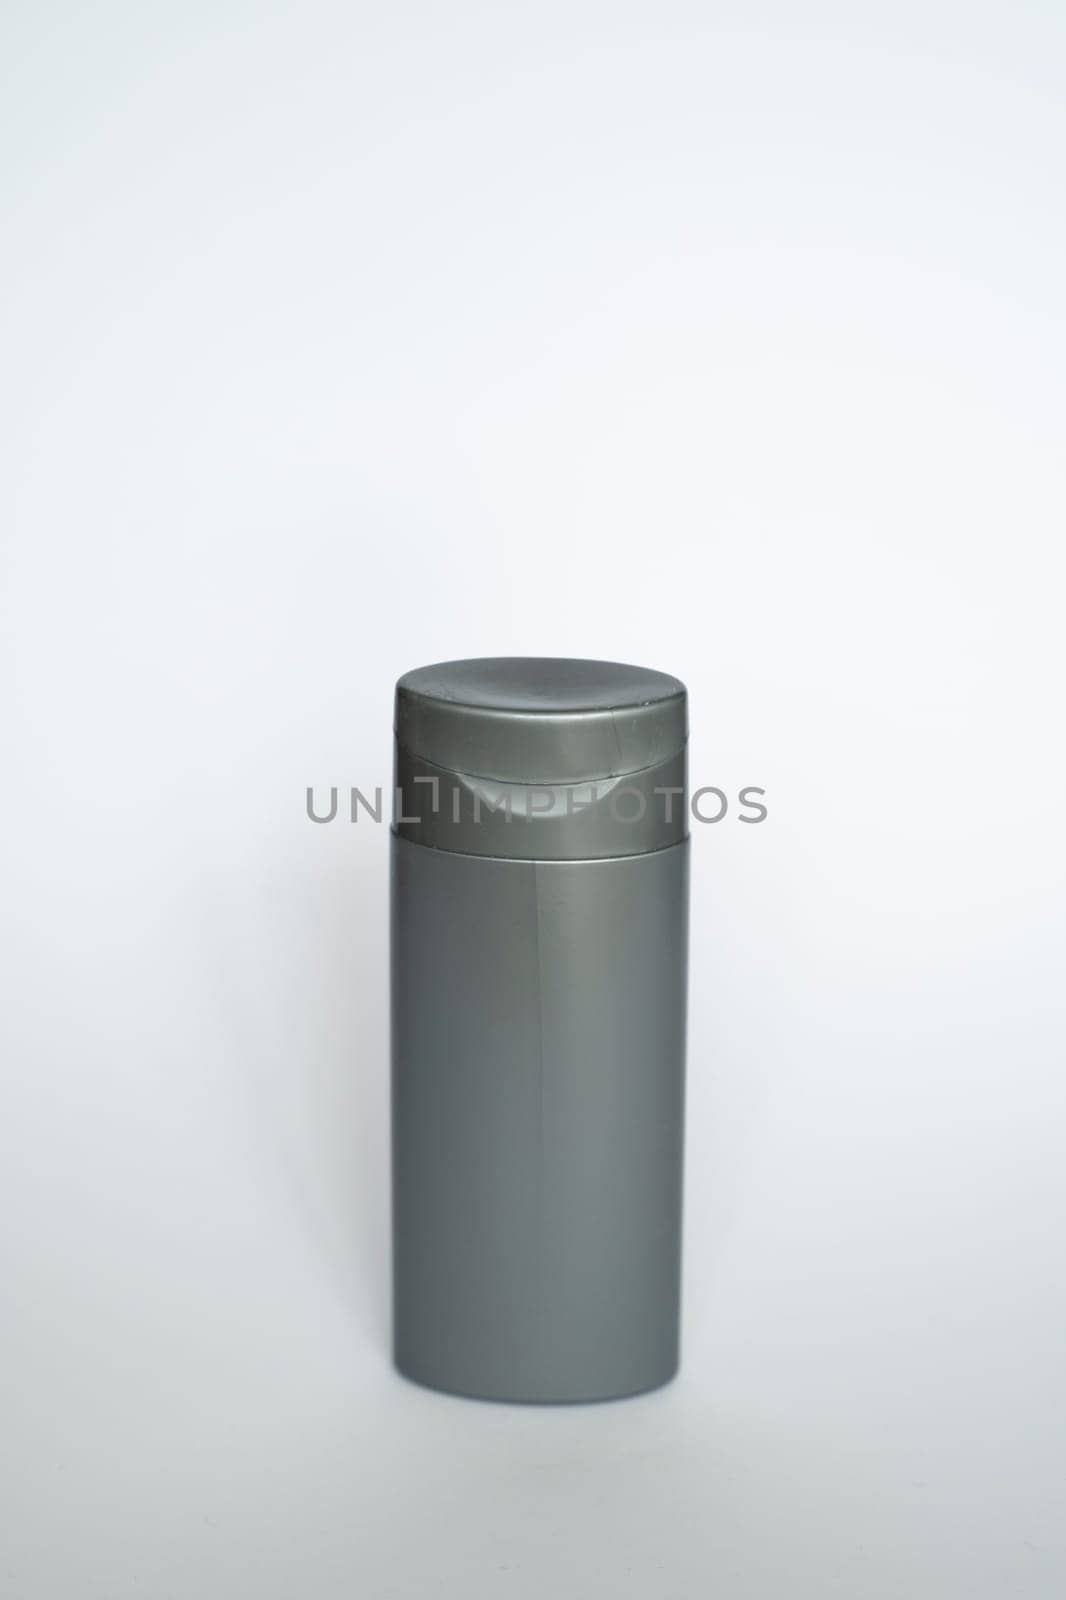 Black shampoo packaging mockup. Vertical empty plastic cosmetic package for man, isolated on white background. Container of conditioner, hair rinse